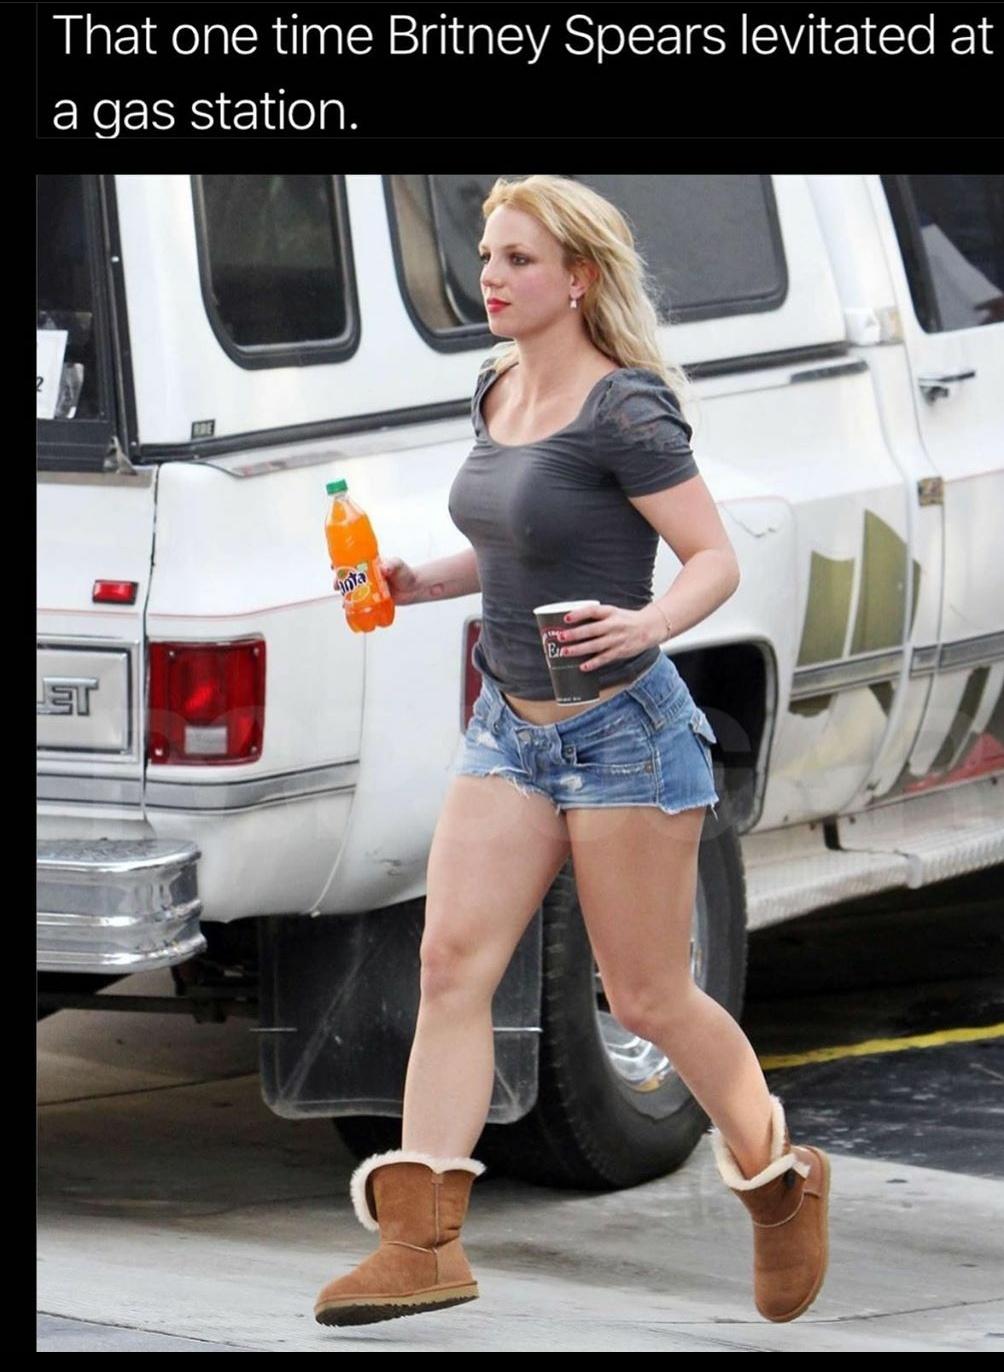 funny memes - britney spears thicc - That one time Britney Spears levitated at a gas station. Gota E St